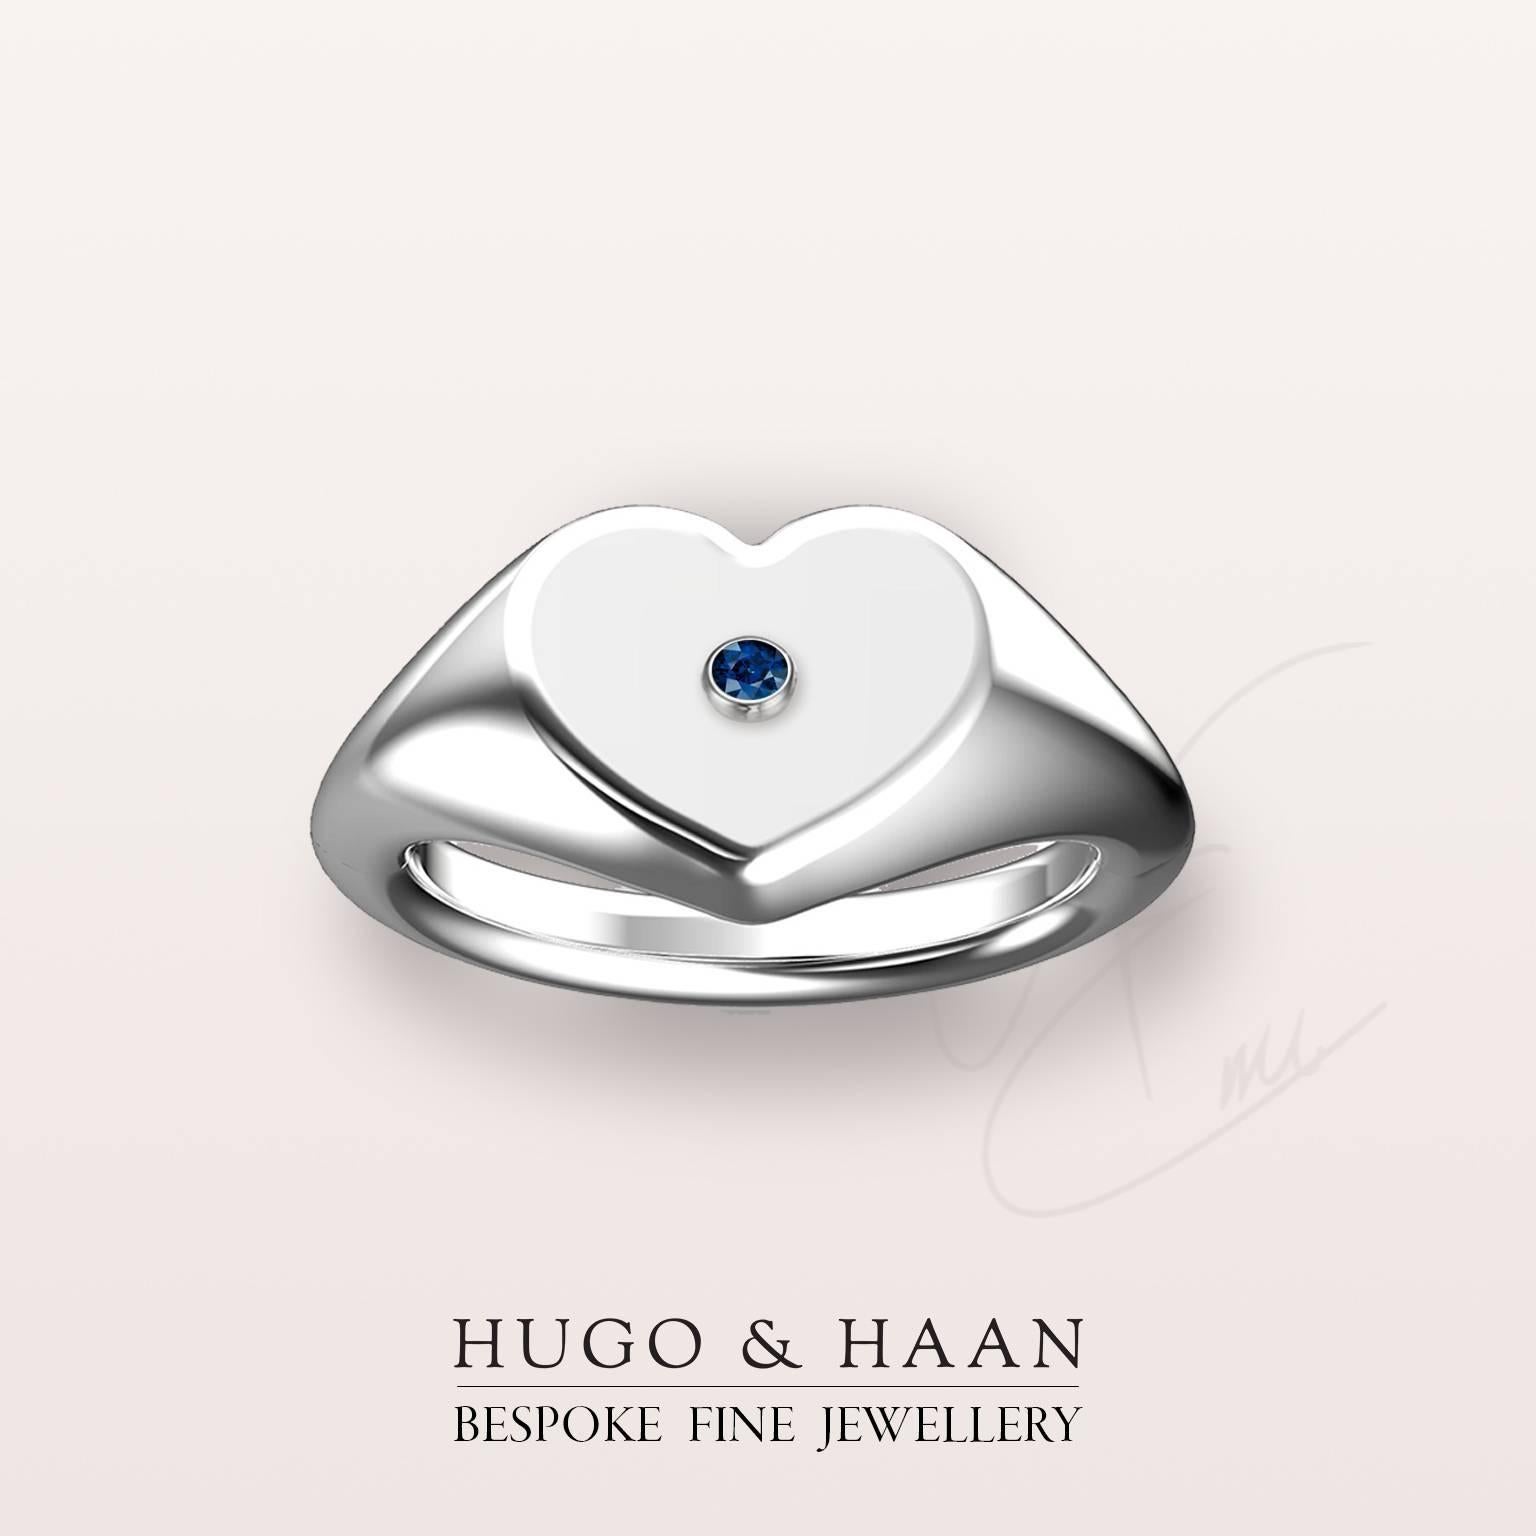 Details:

Material : 18k White Gold
Principle Gemstone : Blue Sapphire
Other Gemstone : -
Customizable: Yes

Options to customize: 

Metals available : Platinum, 18kt Yellow Gold or 18kt White Gold
Gemstones Available : Most semi-precious and